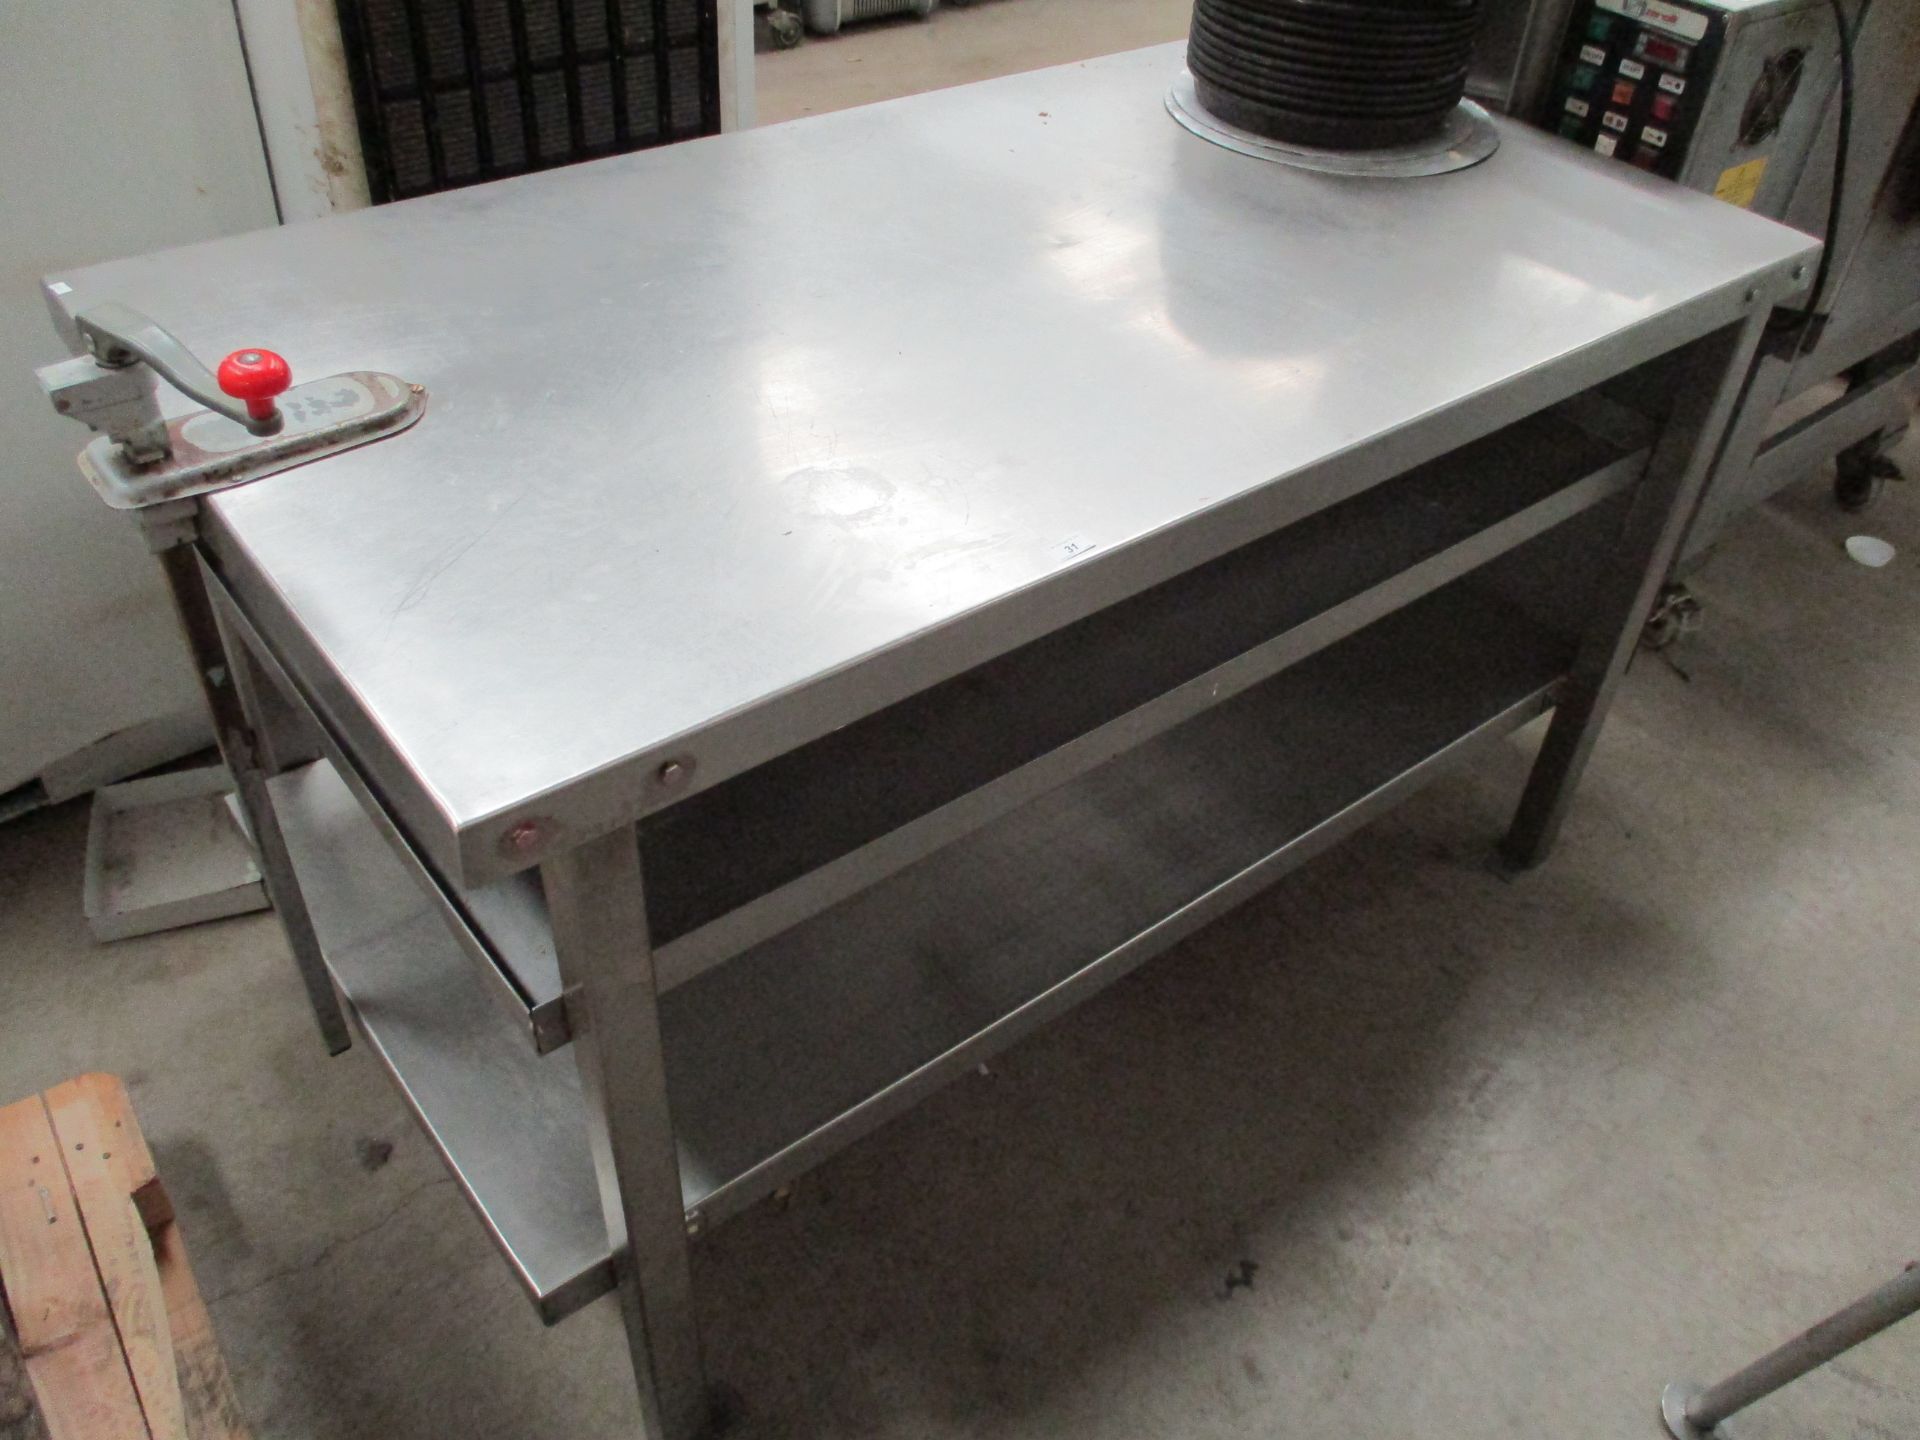 A stainless steel preparation table with under shelf and a manual can opener